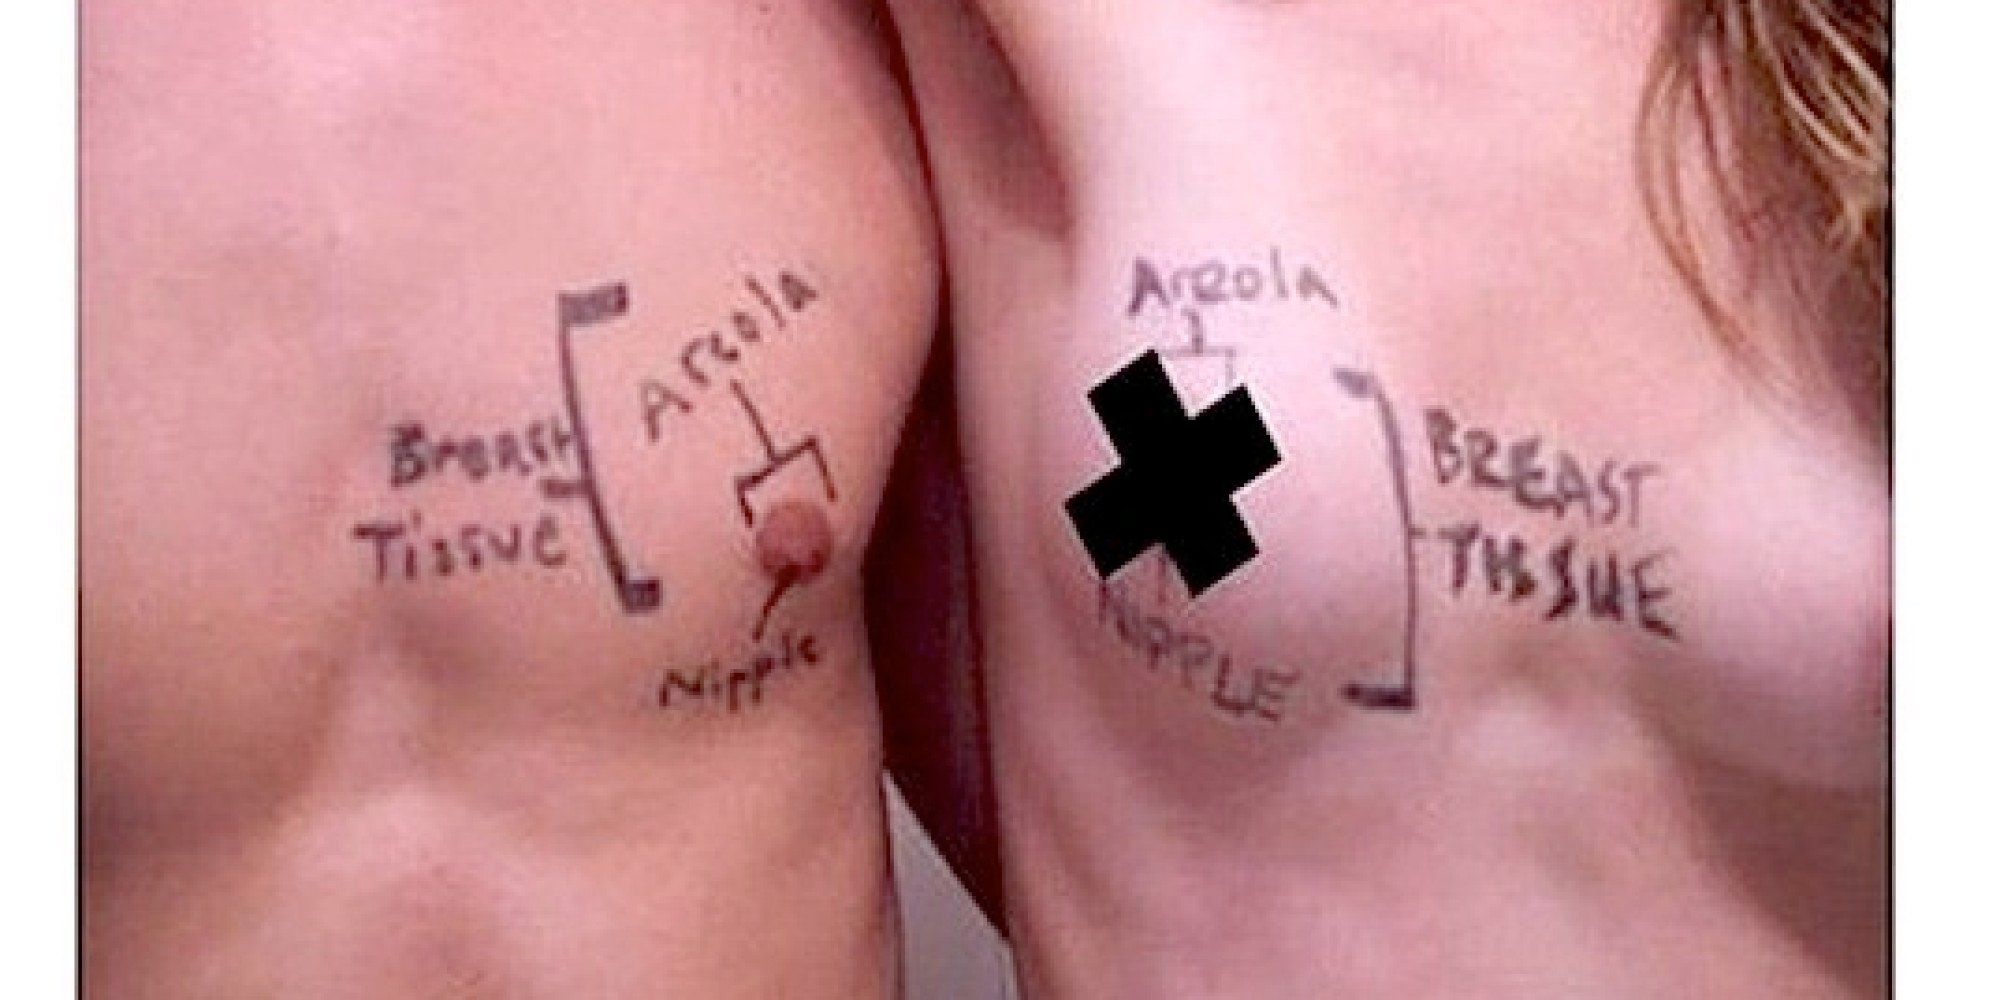 Facebook Wages War on the Nipple